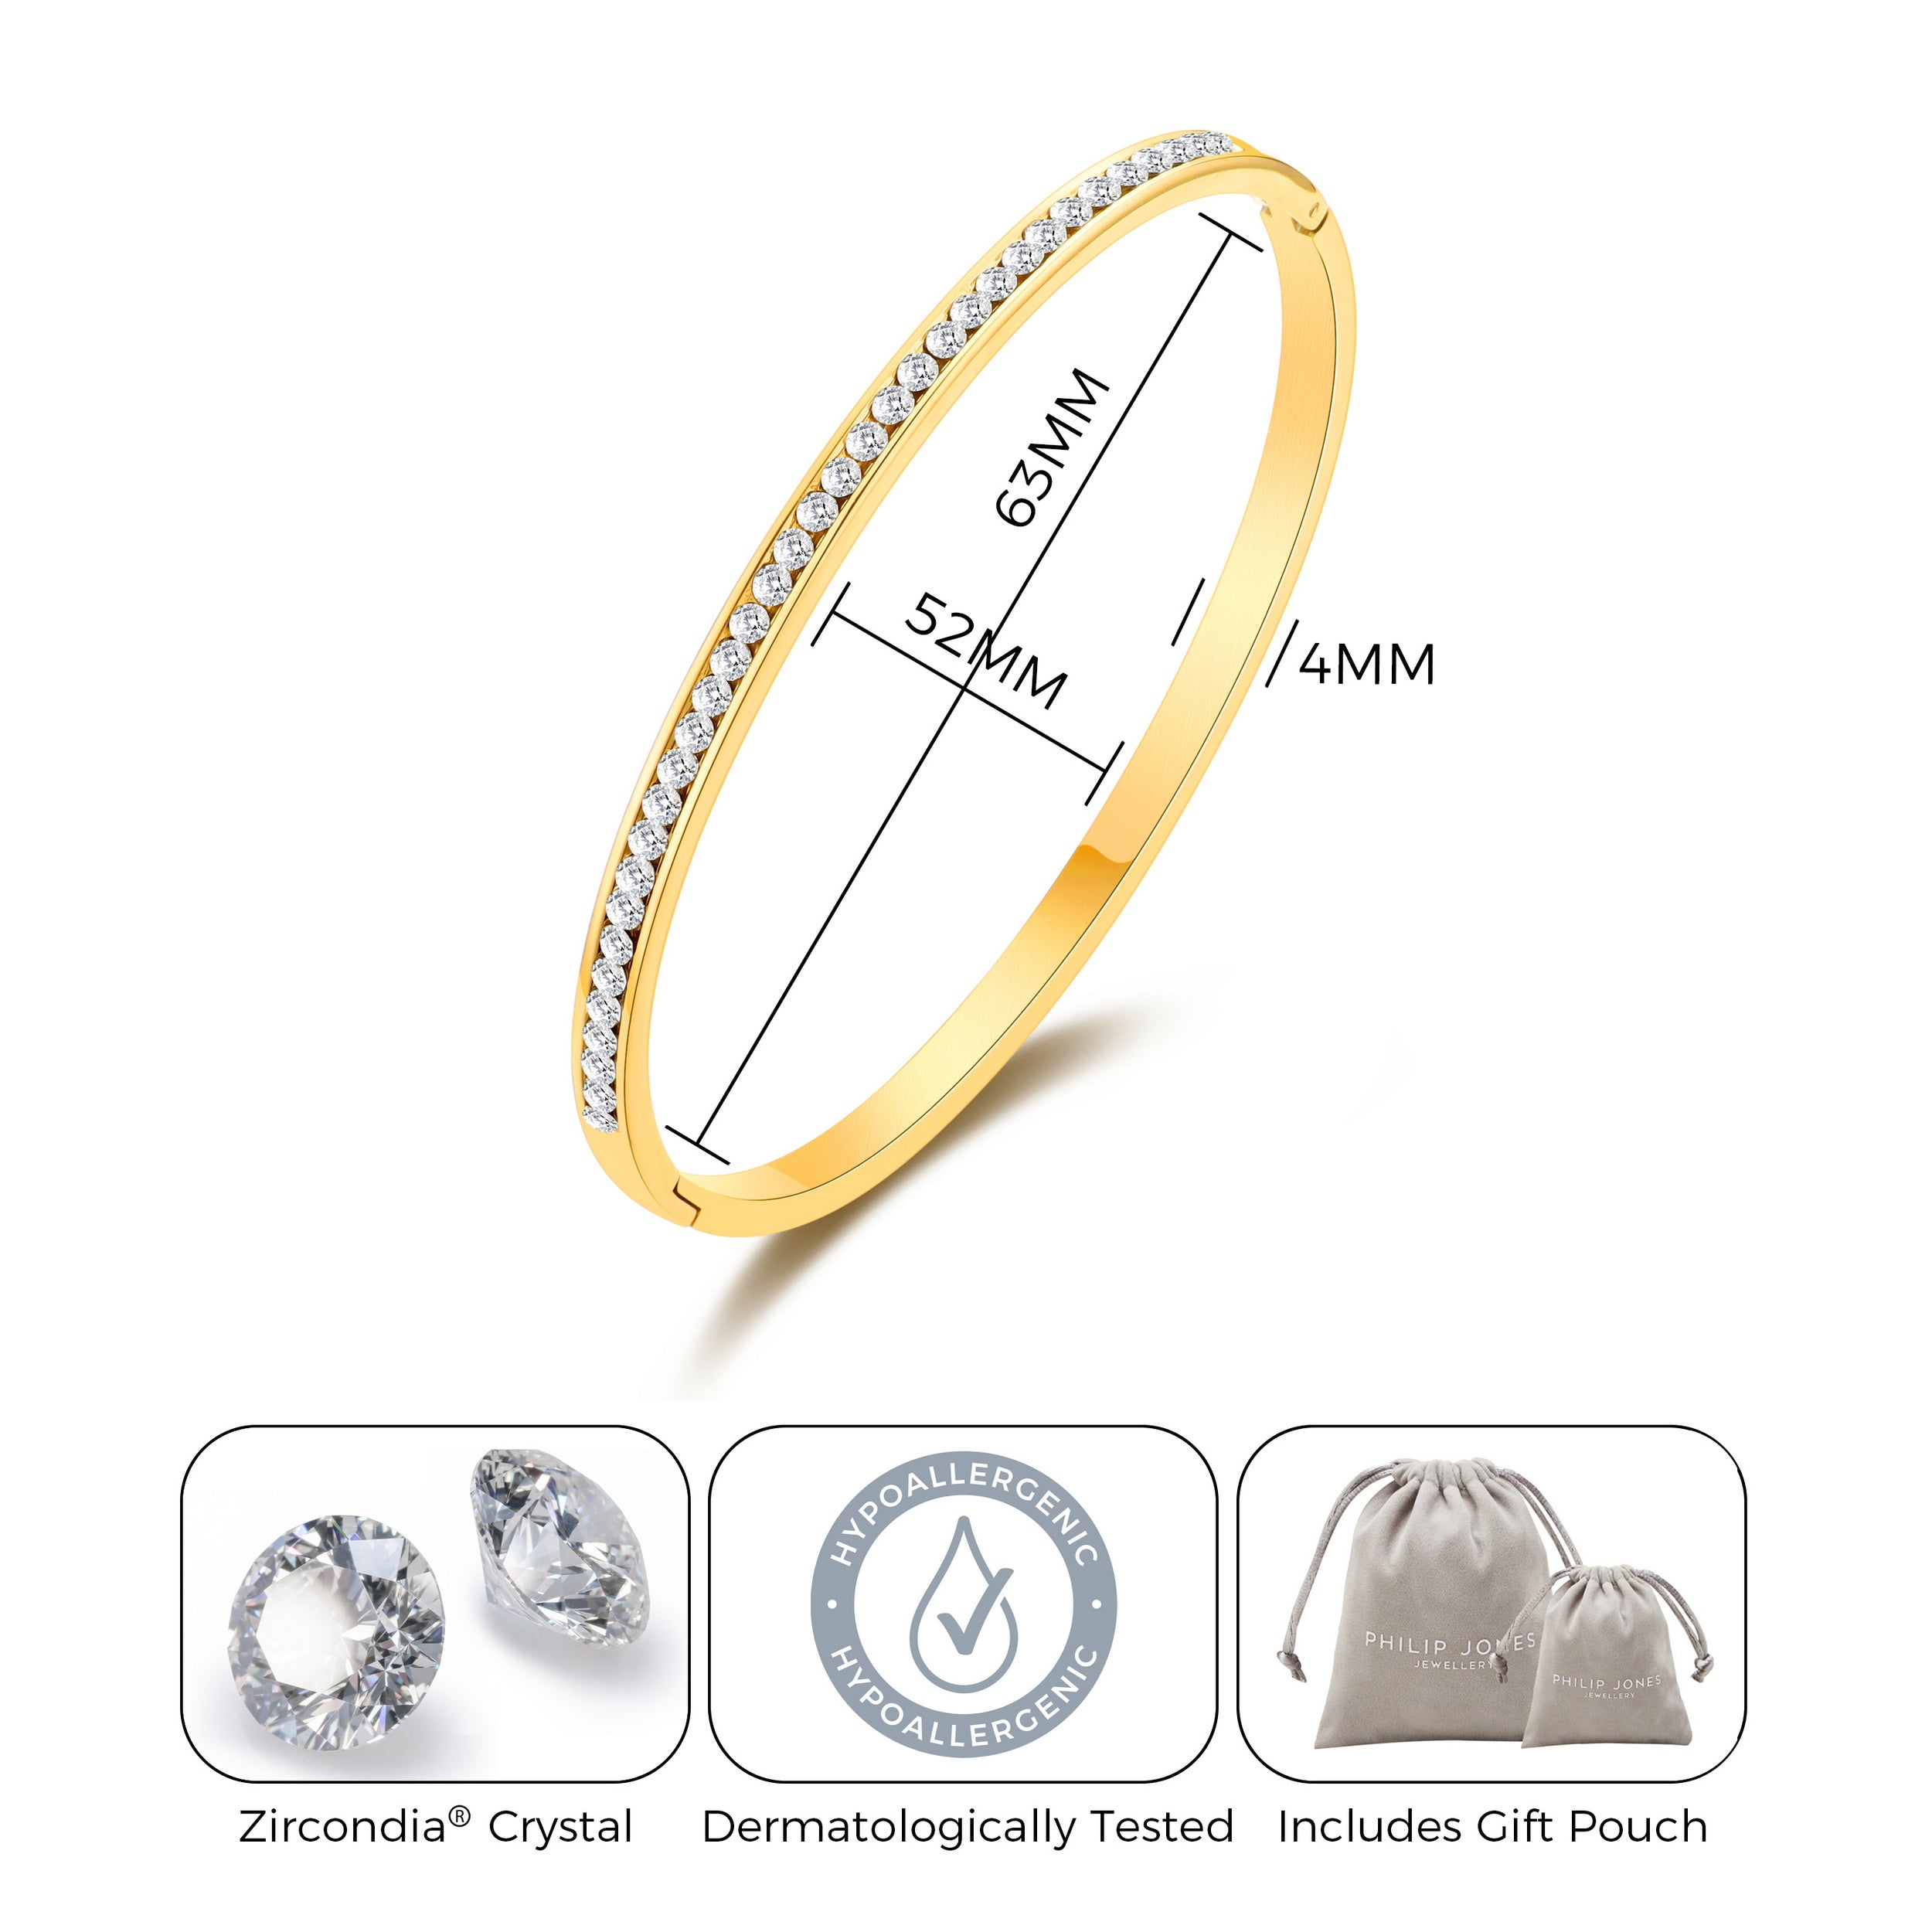 Gold Plated Channel Set Bangle Created with Zircondia® Crystals